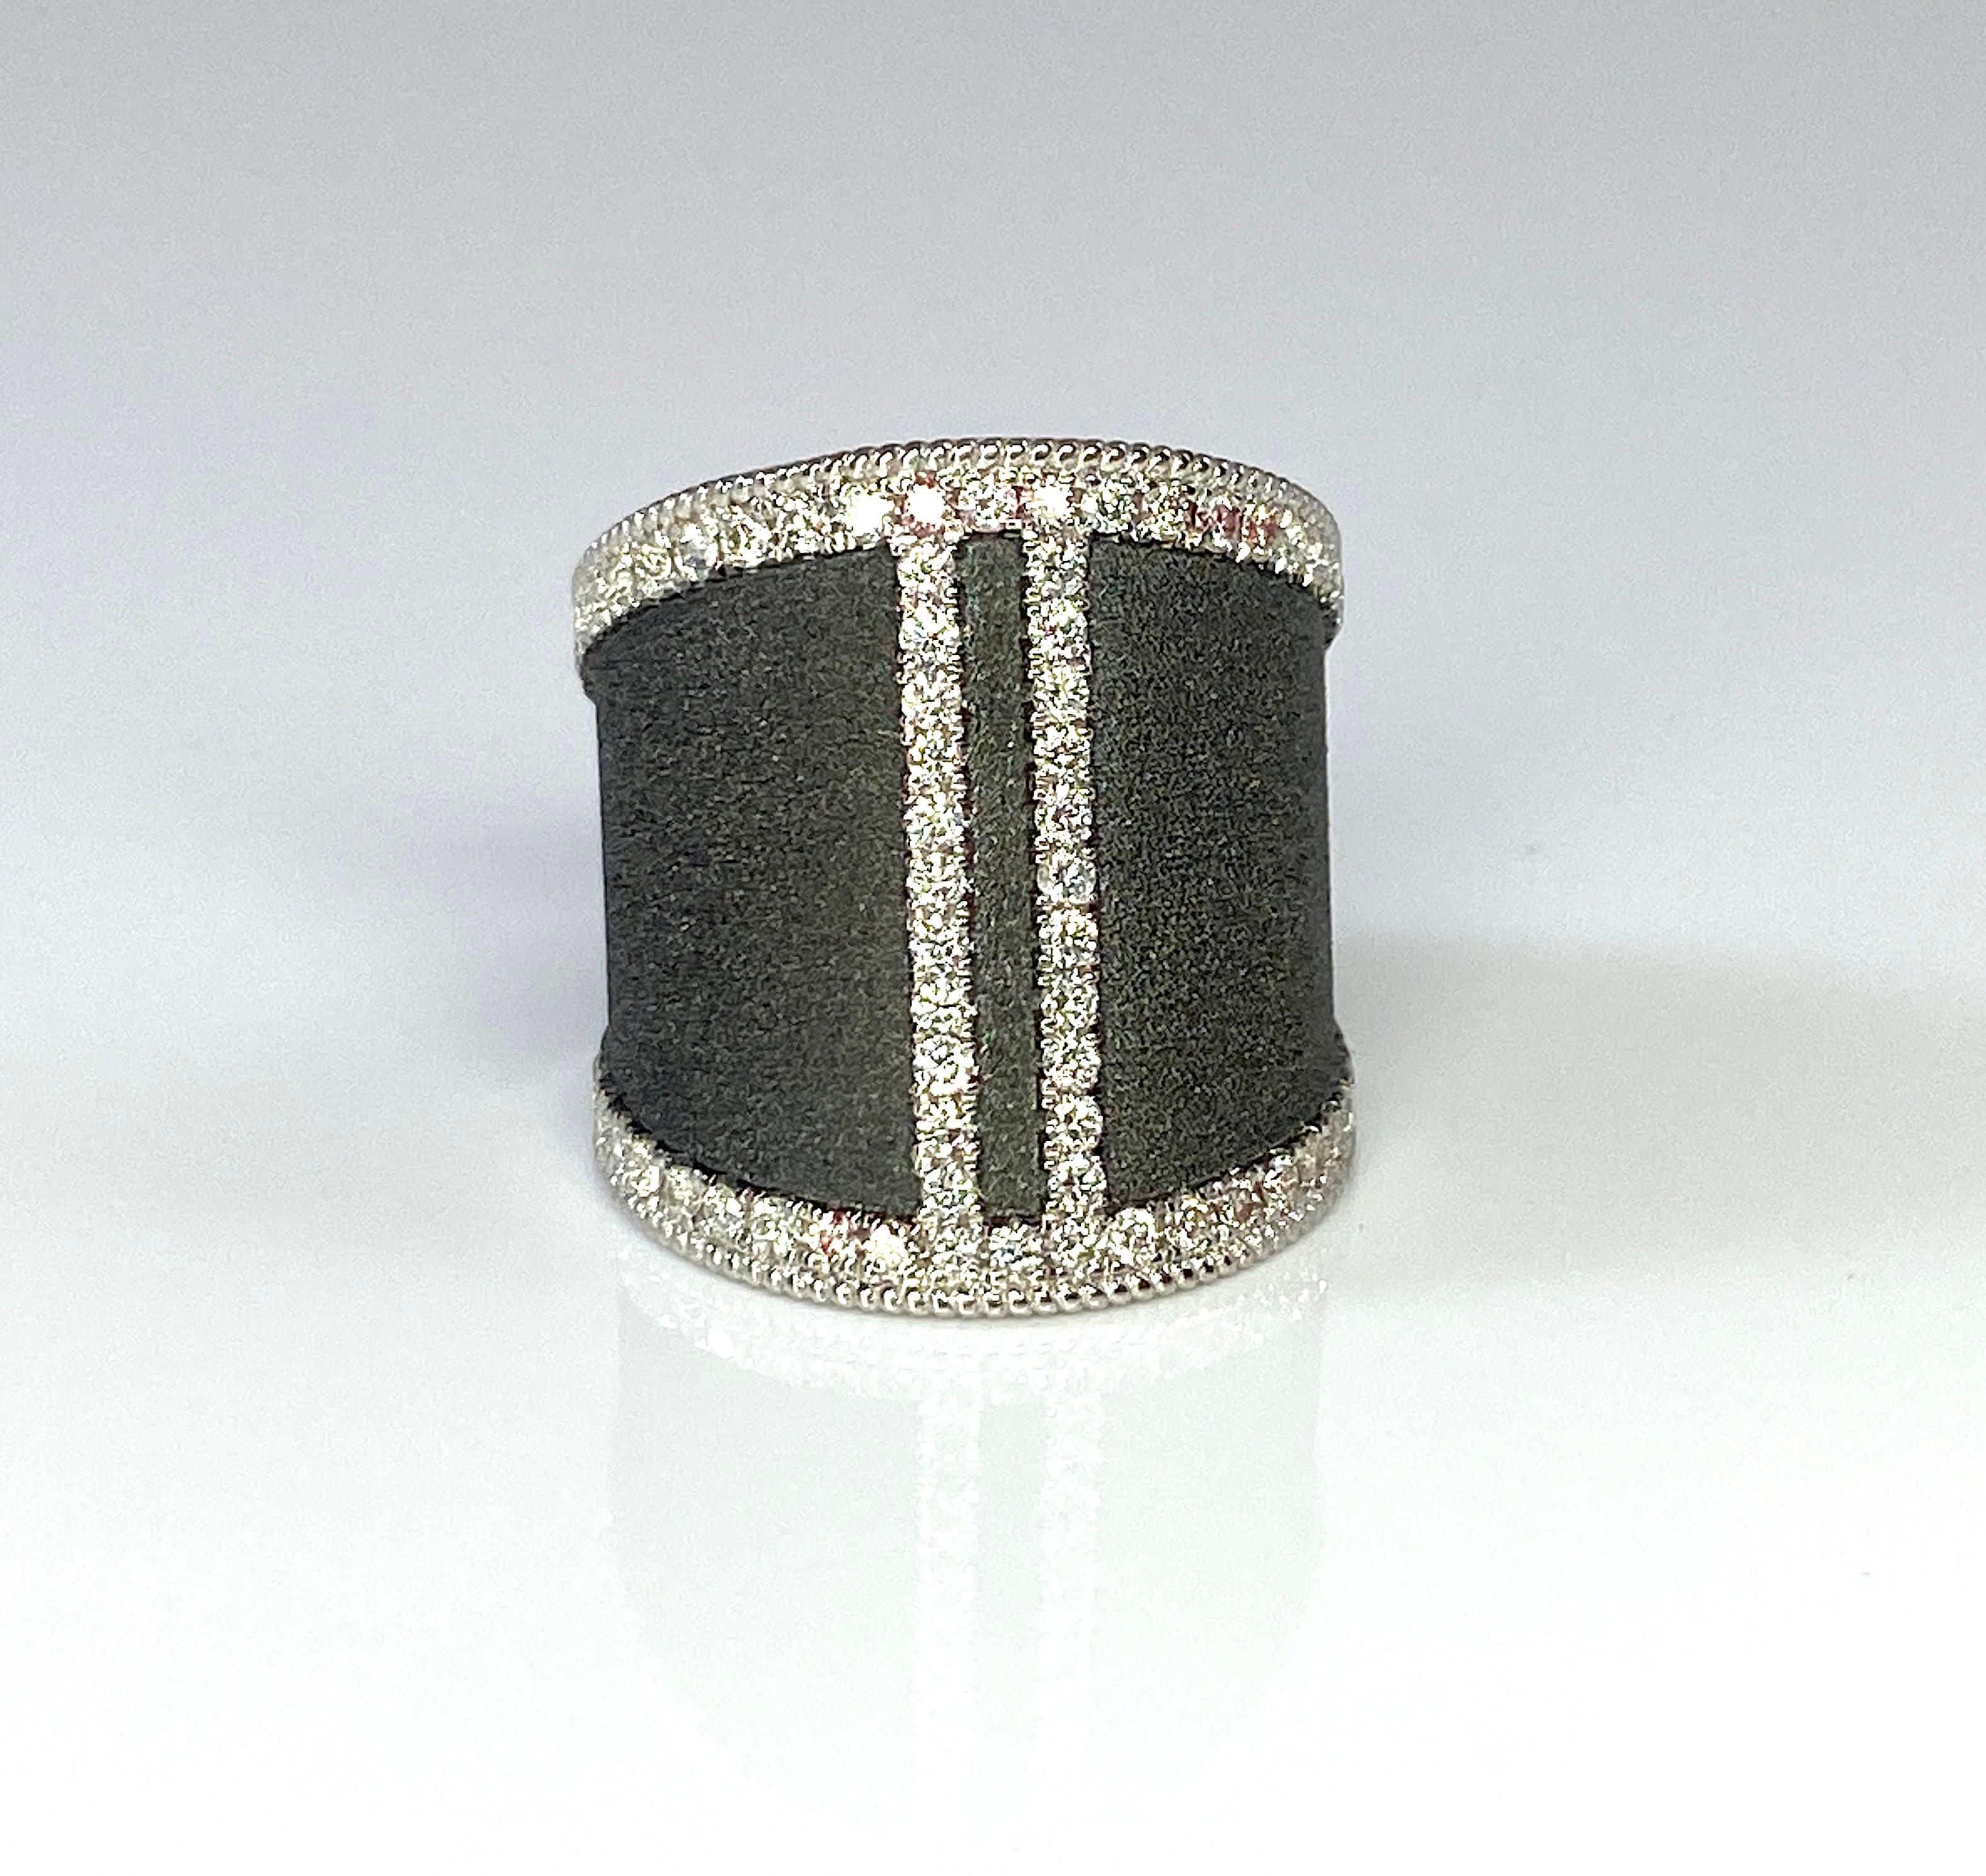 You are admiring S.Georgios designer 18 Karat Solid White Gold Wide Ring all handmade in Byzantine style and a stunning unique velvet background finished with Black Rhodium. This gorgeous ring features  0.80 Carats of Brilliant-cut White Diamonds